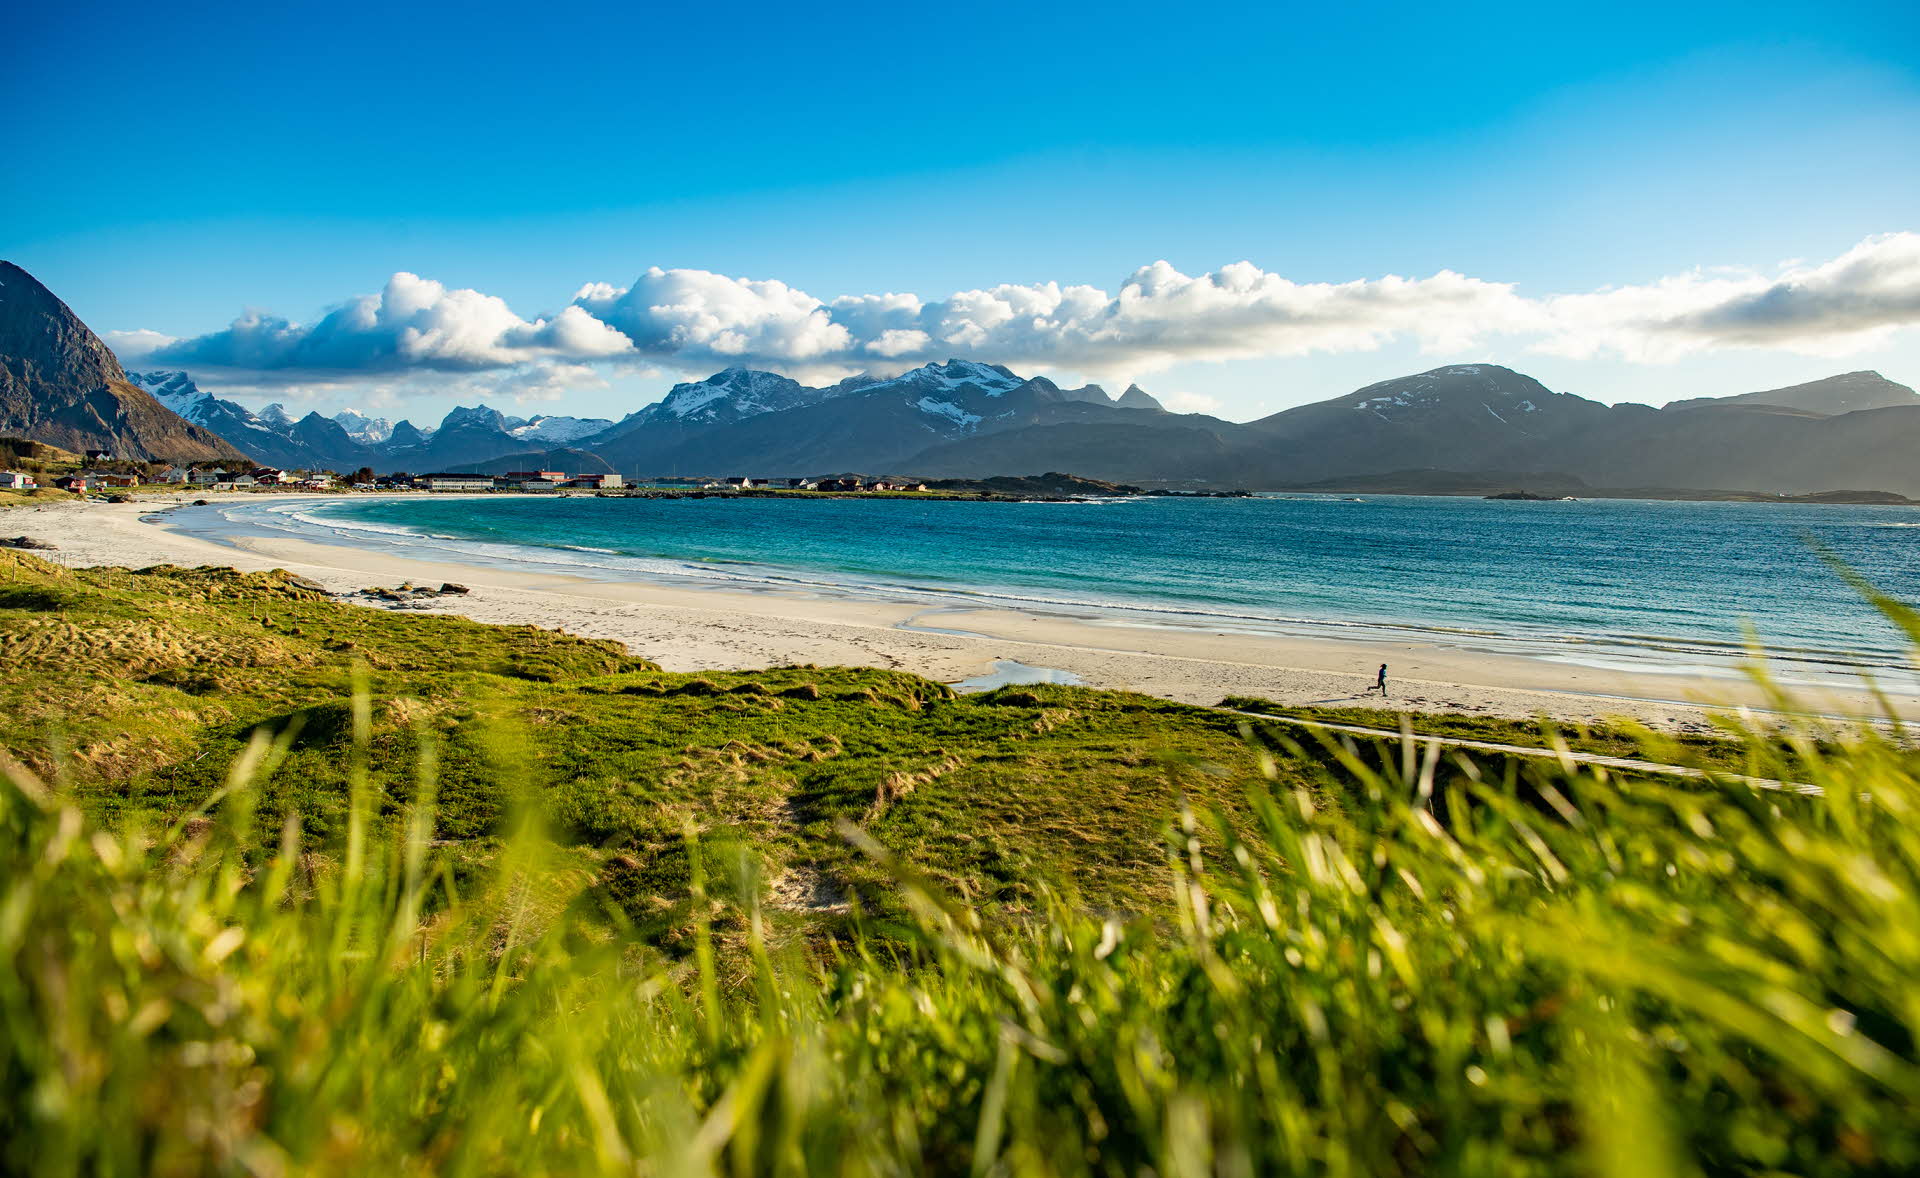 Green grass in front of a white sandy beach, blue sea and dark mountains in the background.